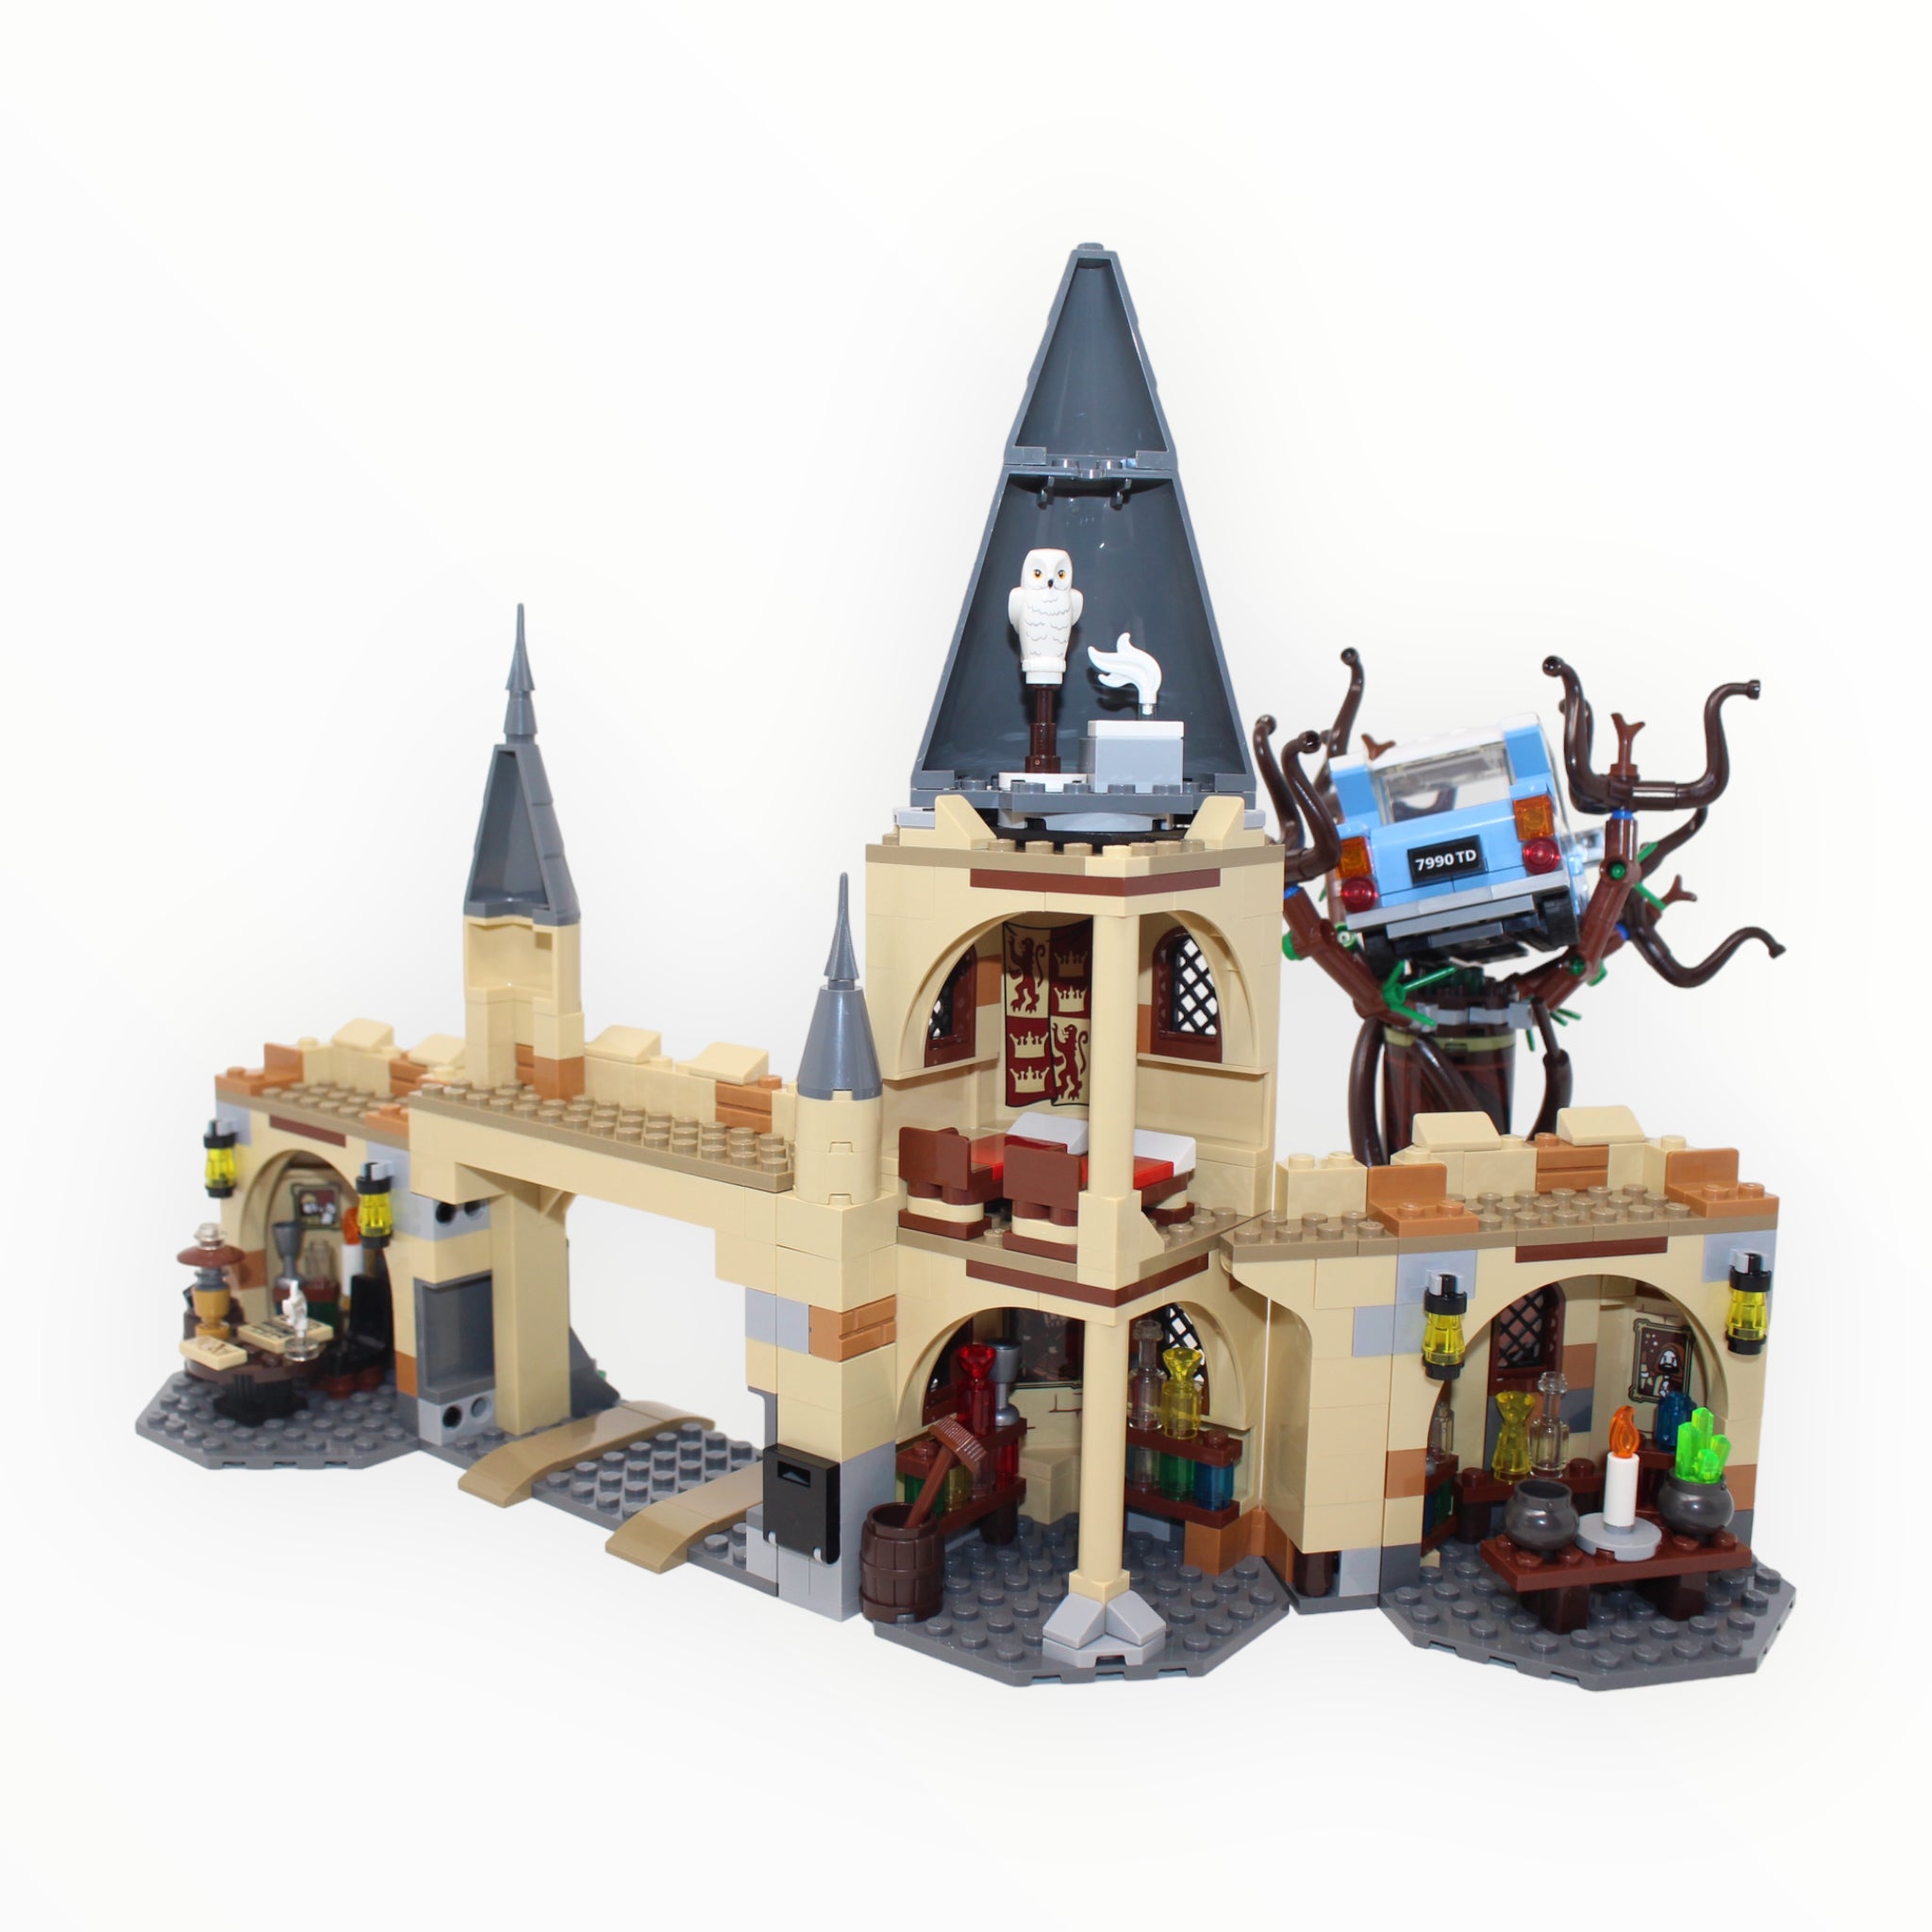 Used Set 75953 Harry Potter Hogwarts Whomping Willow